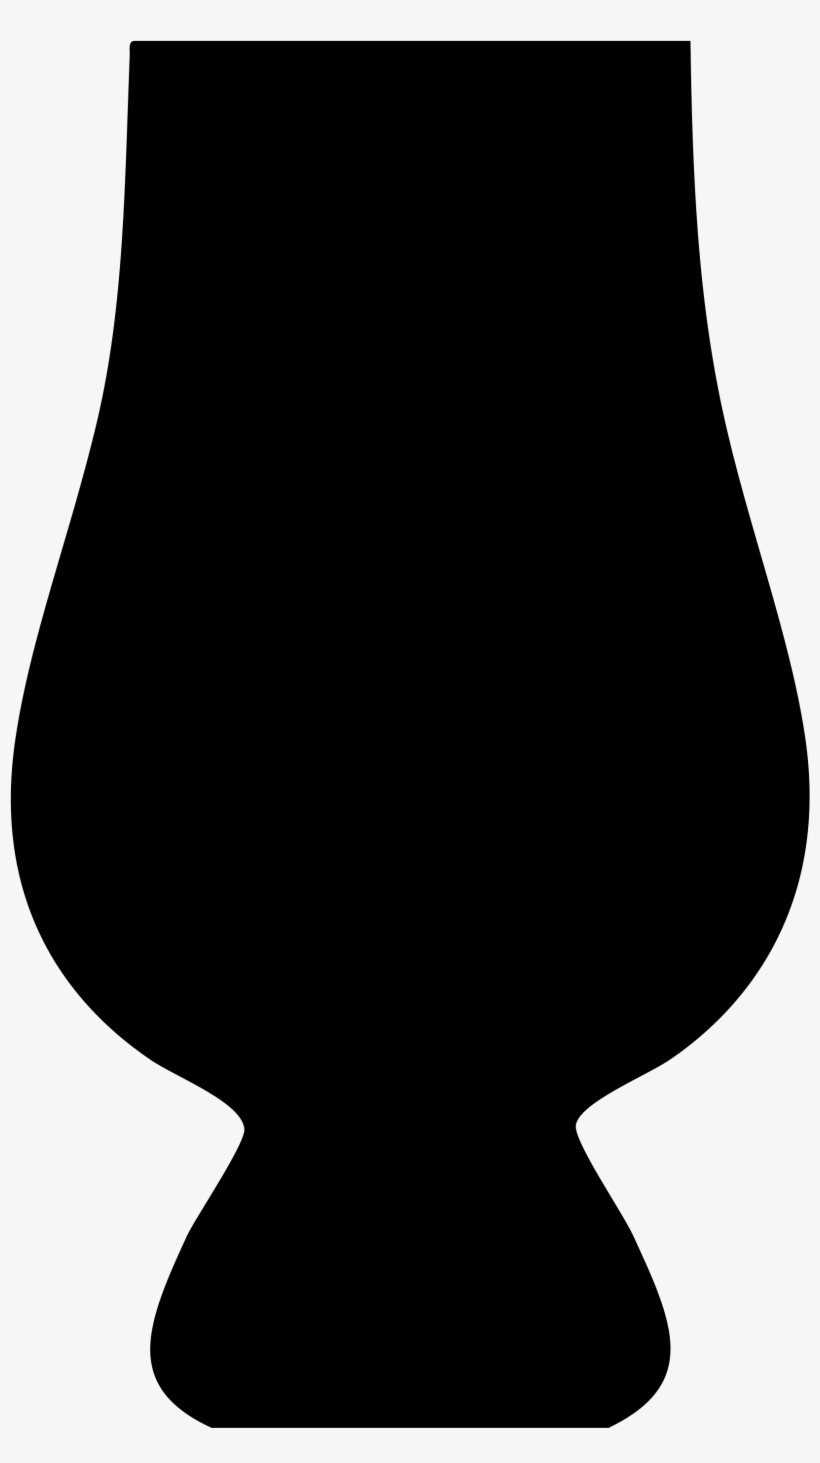 Glencairn Whisky Glass Silhouette - Whisky Glass Silhouette, transparent png #1221508